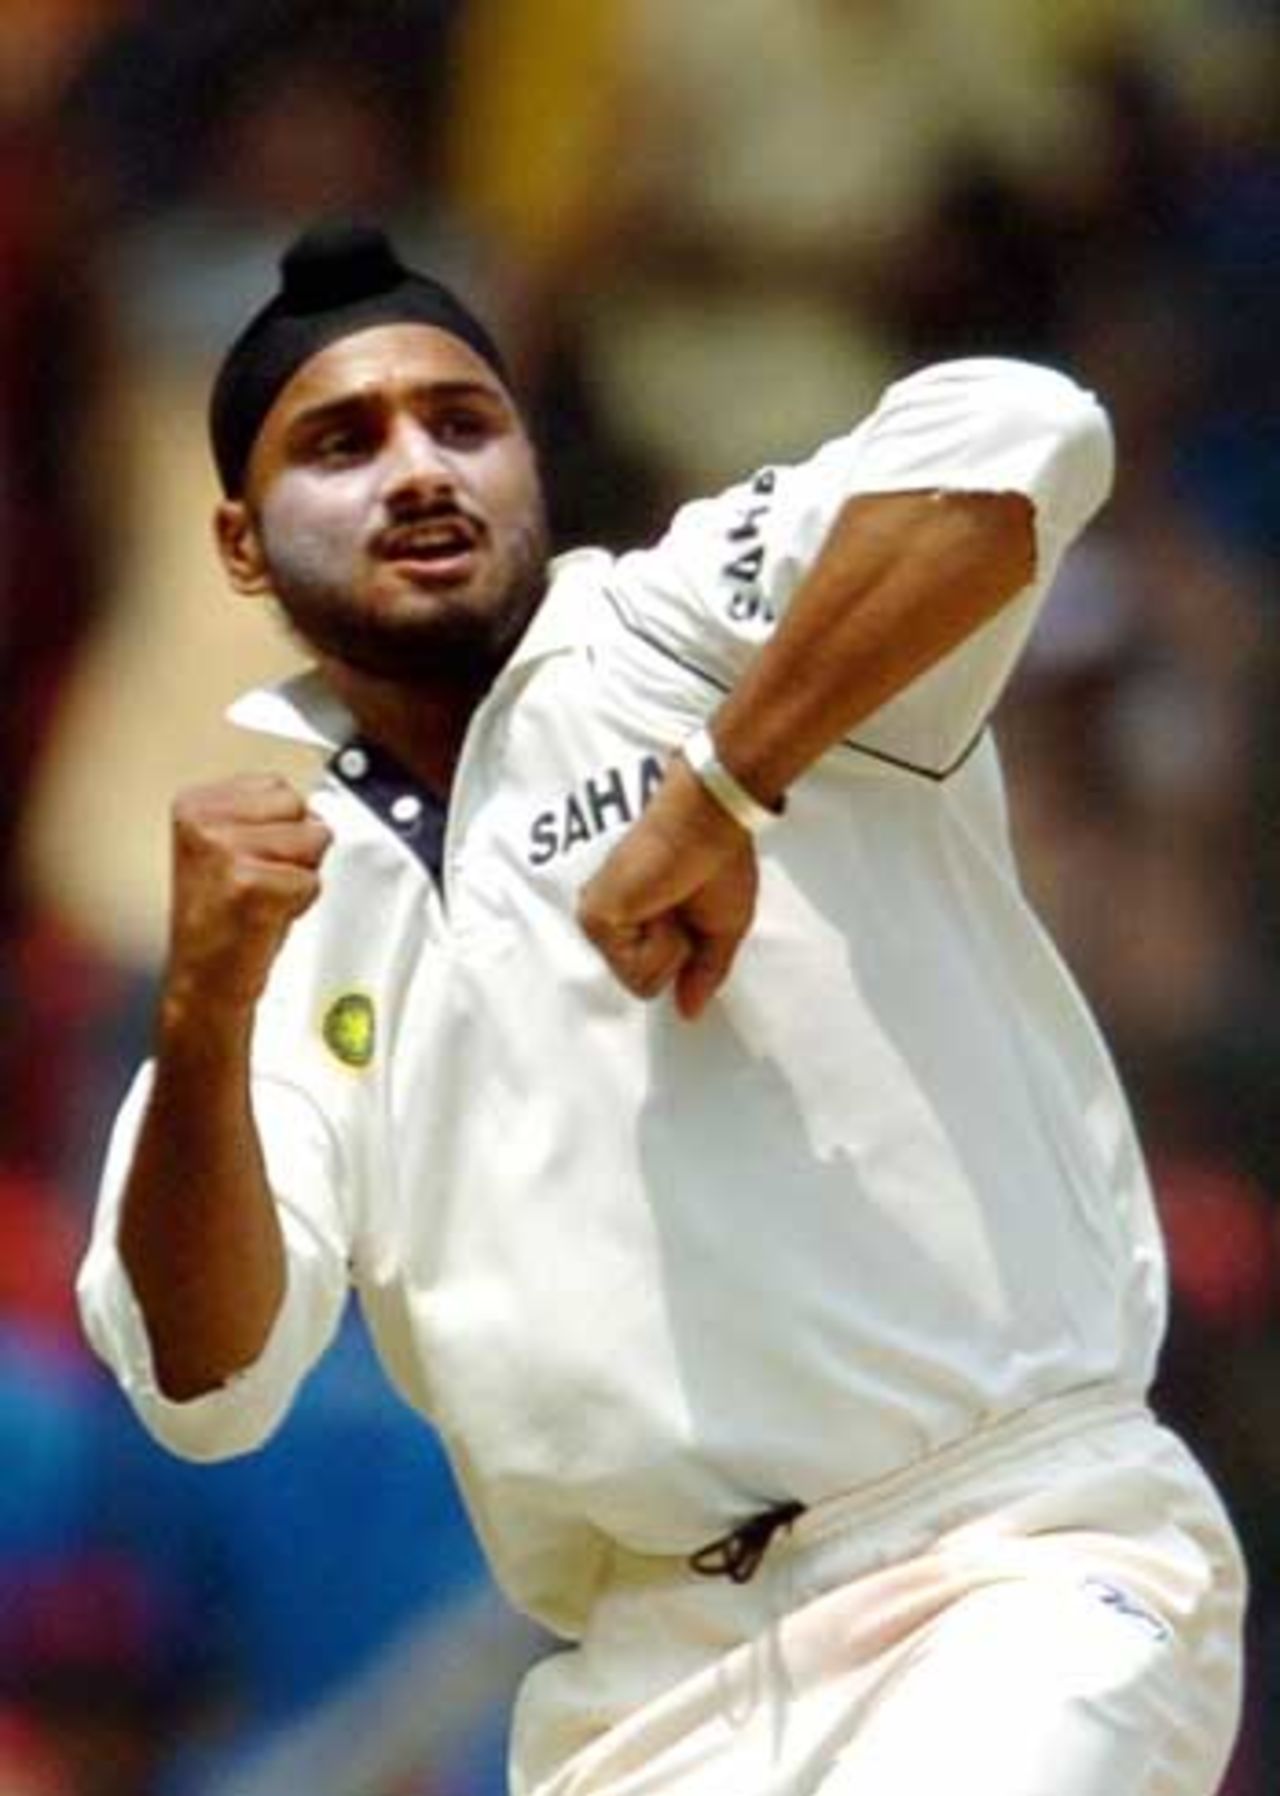 Harbhajan Singh pumps his fist on the way to a six-wicket haul, India v Pakistan, 3rd Test, Bangalore, 1st day, March 24, 2005